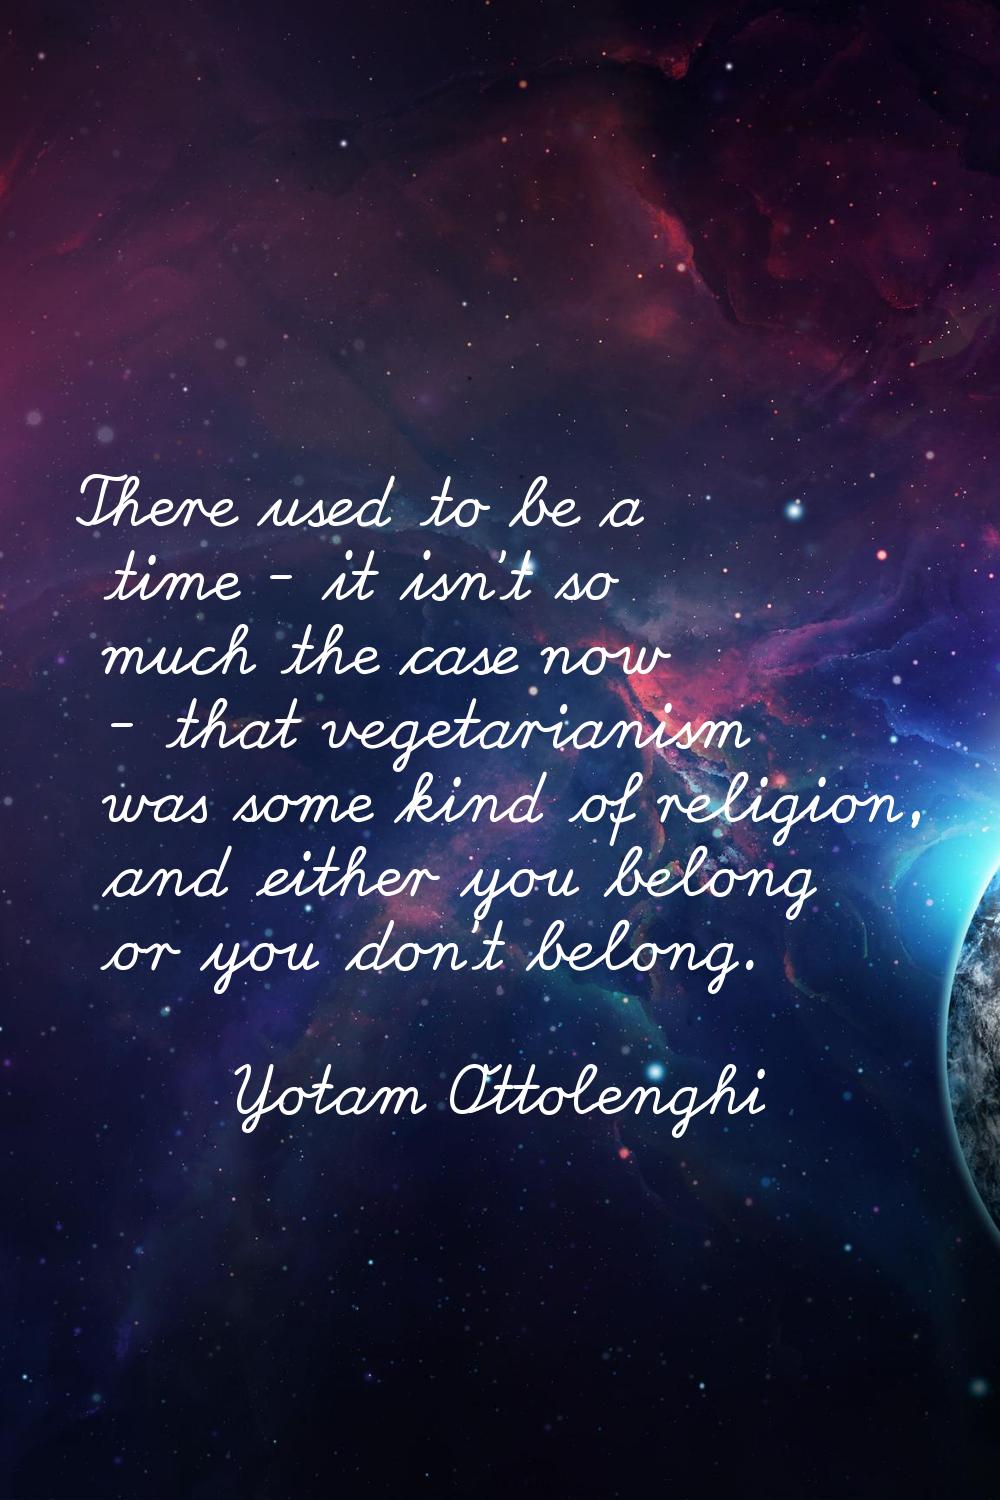 There used to be a time - it isn't so much the case now - that vegetarianism was some kind of relig